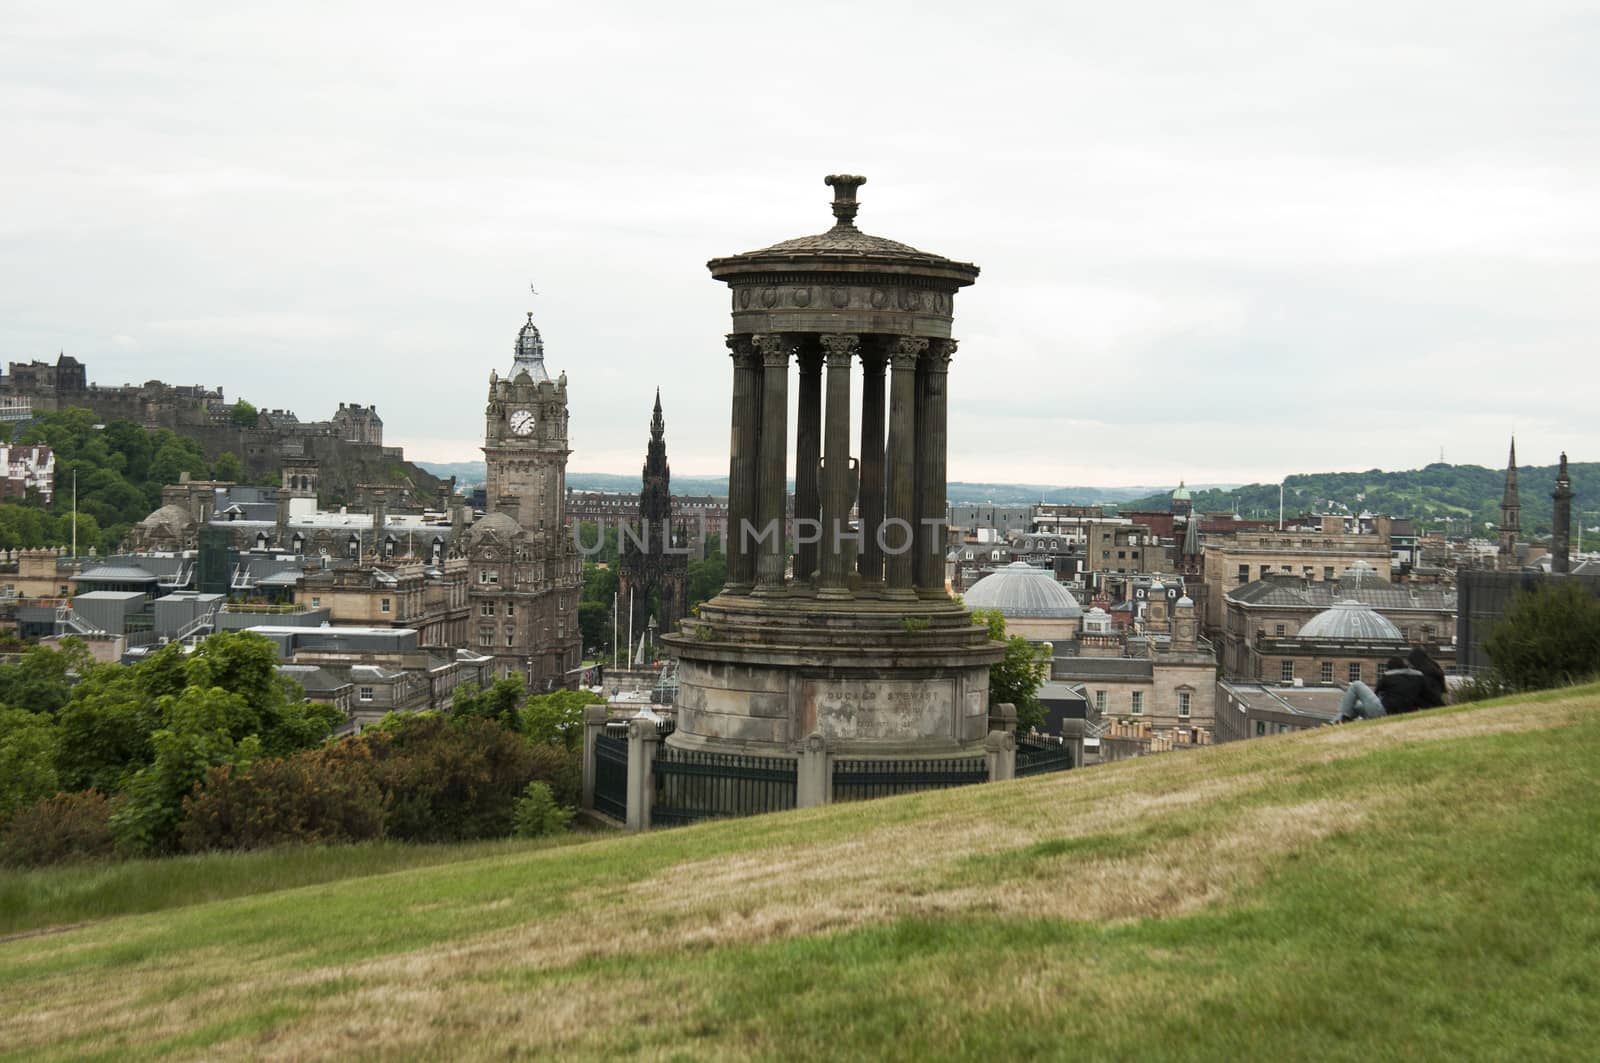 View over Edinburgh, with the Dugald Stewart Monument in the foreground